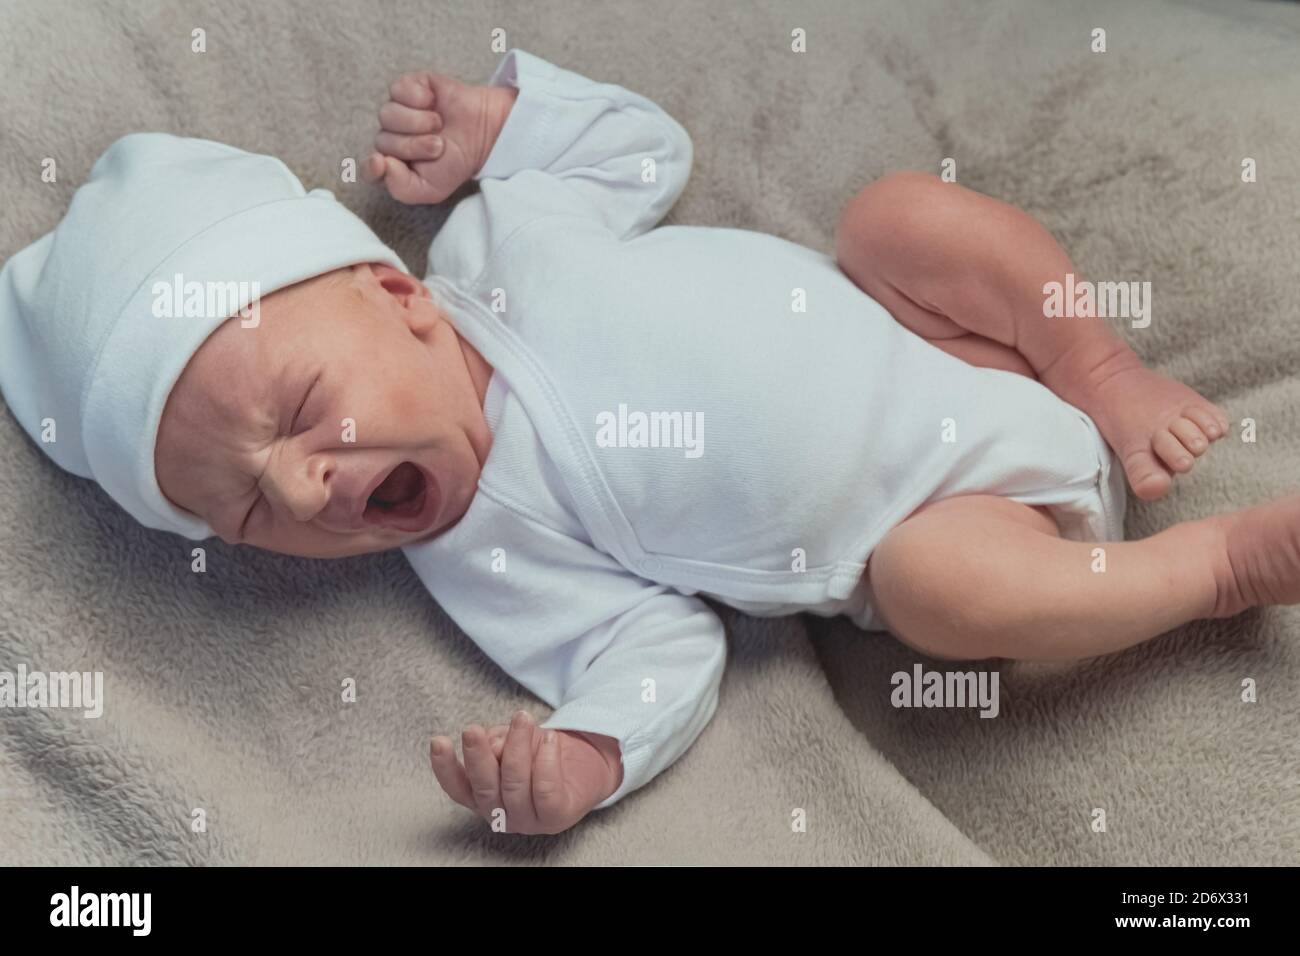 Cute newborn baby yawning and stretching on the blanket. High quality photo Stock Photo